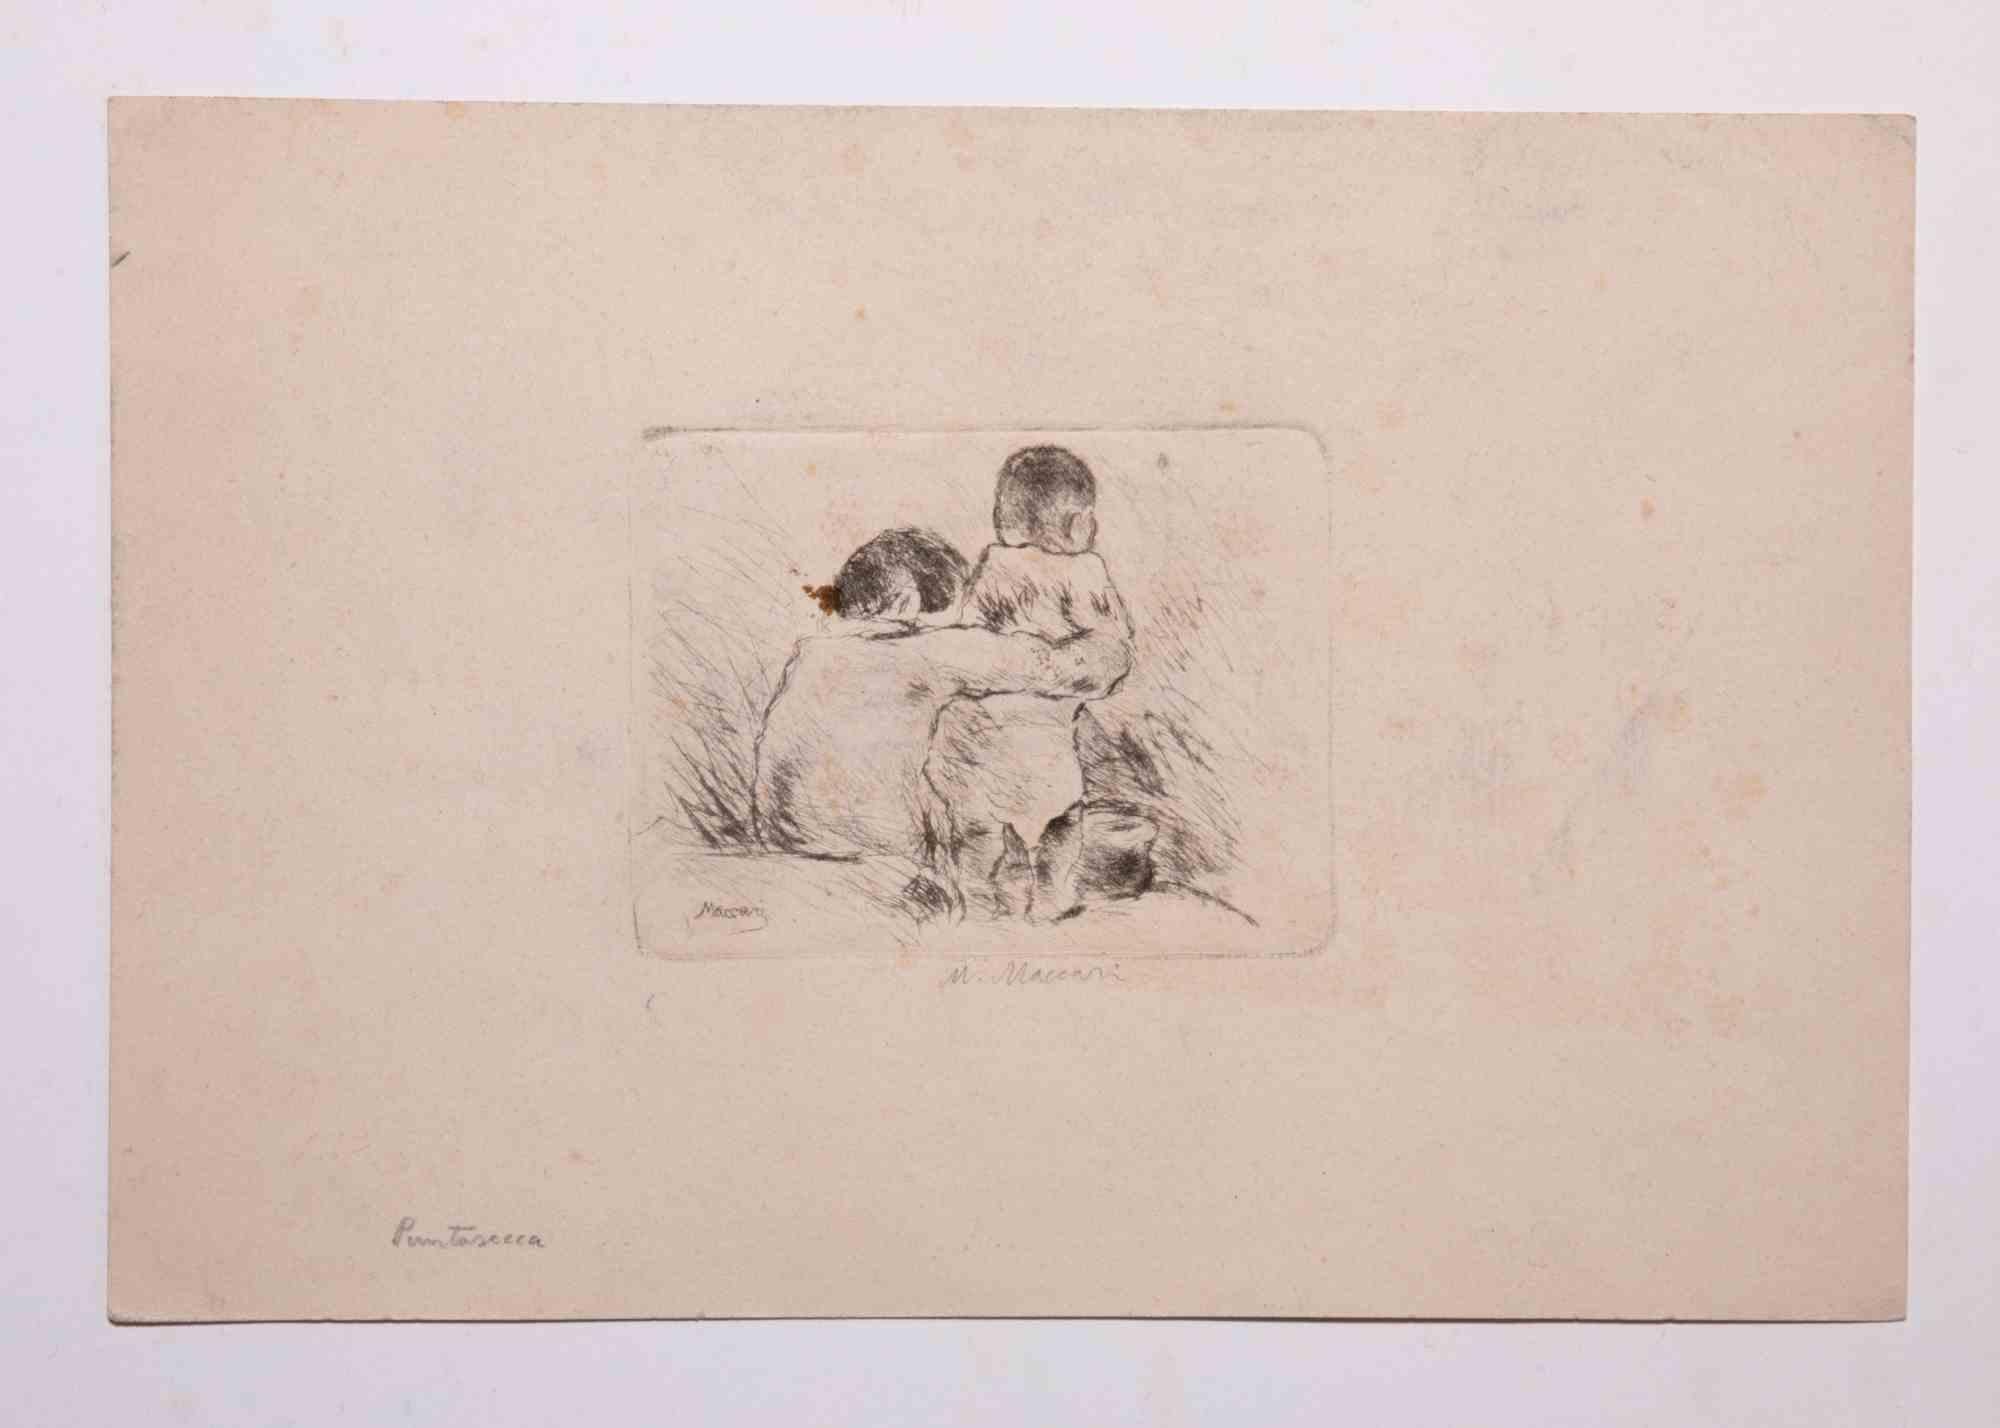 The Dressing is an original Etching and Drypoint Print realized by Mino Maccari in 1925.

Hand-signed in pencil.

Good condition with diffused foxing.

Mino Maccari (1898-1989) was an Italian writer, painter, engraver and journalist, winner the